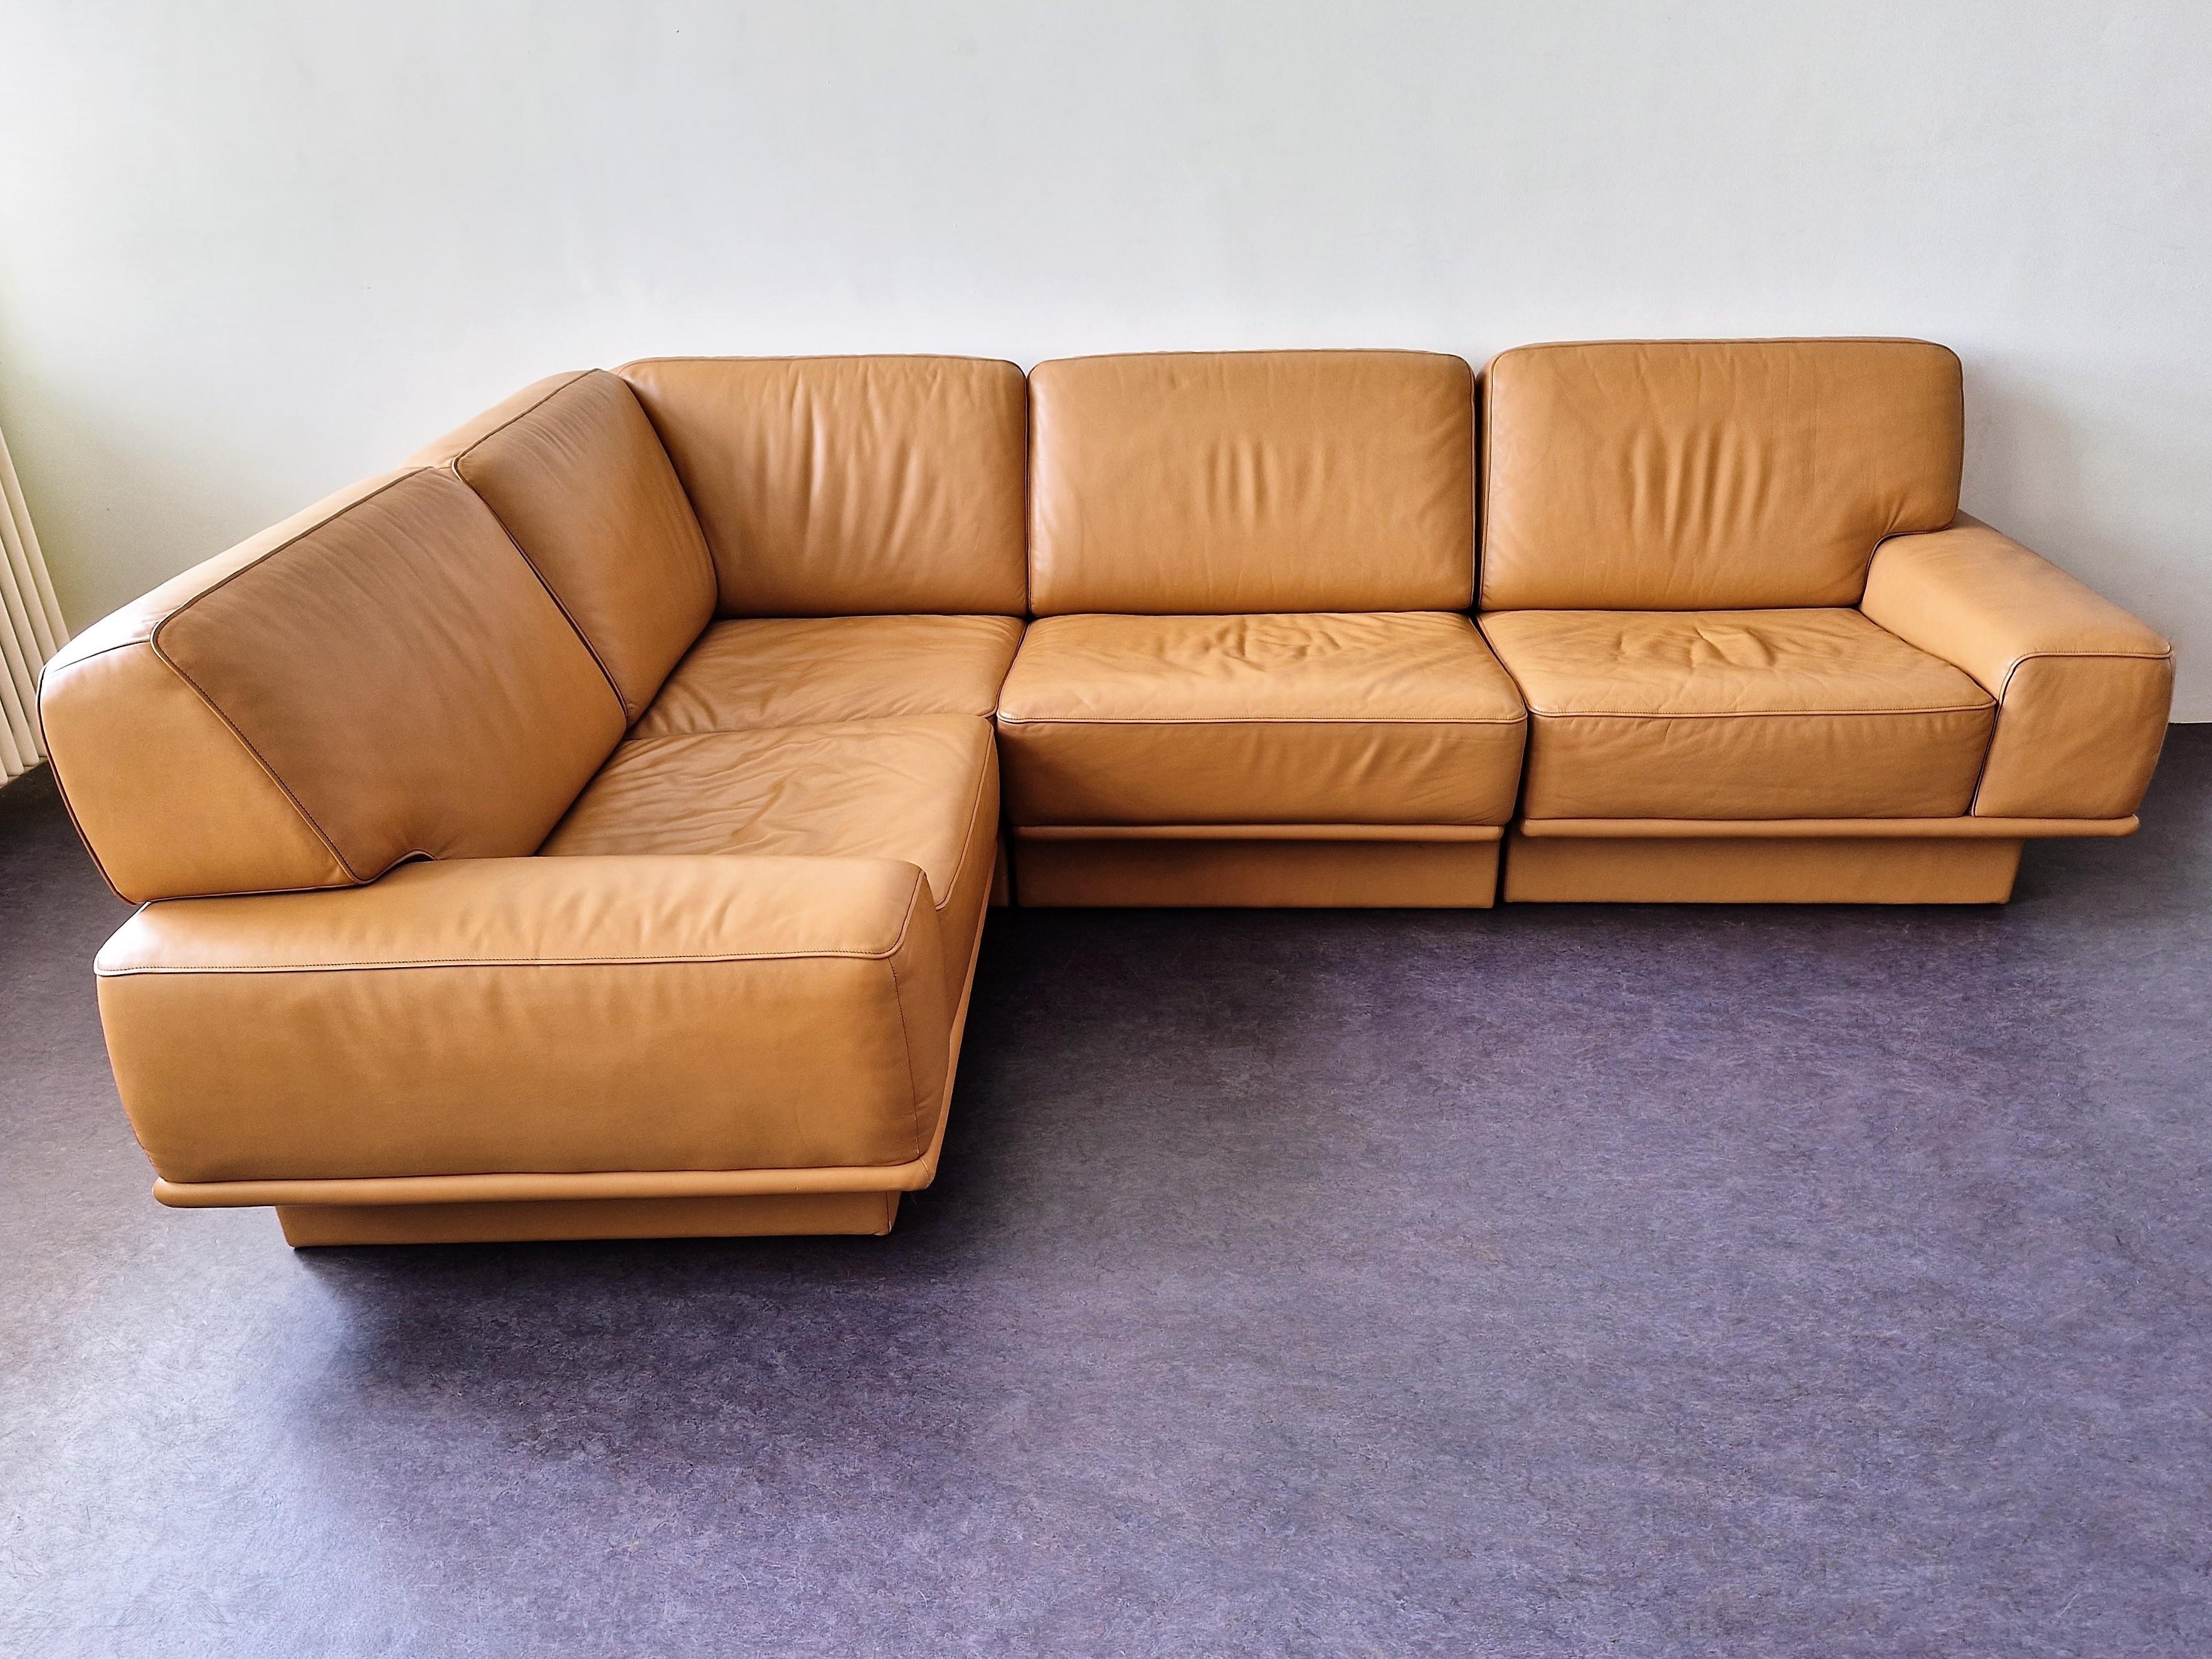 This impressive sectional corner sofa was made by the famous Swiss company 'De Sede'. We have not been able to find much information but we believe it to be model DS94. A beautiful design made of high quality brown leather. It consists out of 4